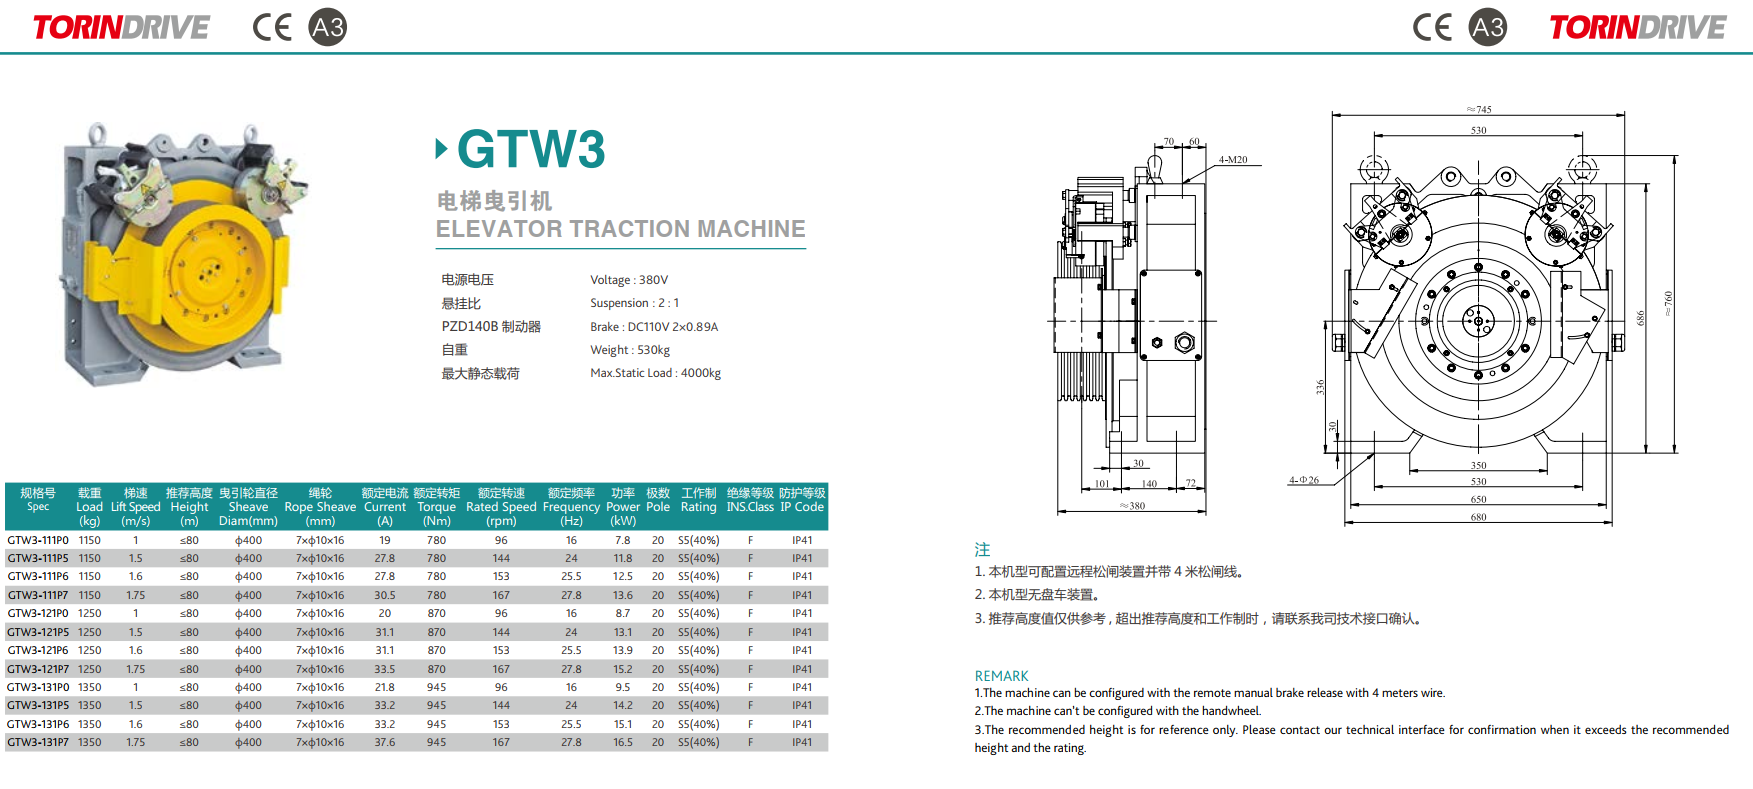 China Elevator Traction Machine Famous Torin Drive GTW3